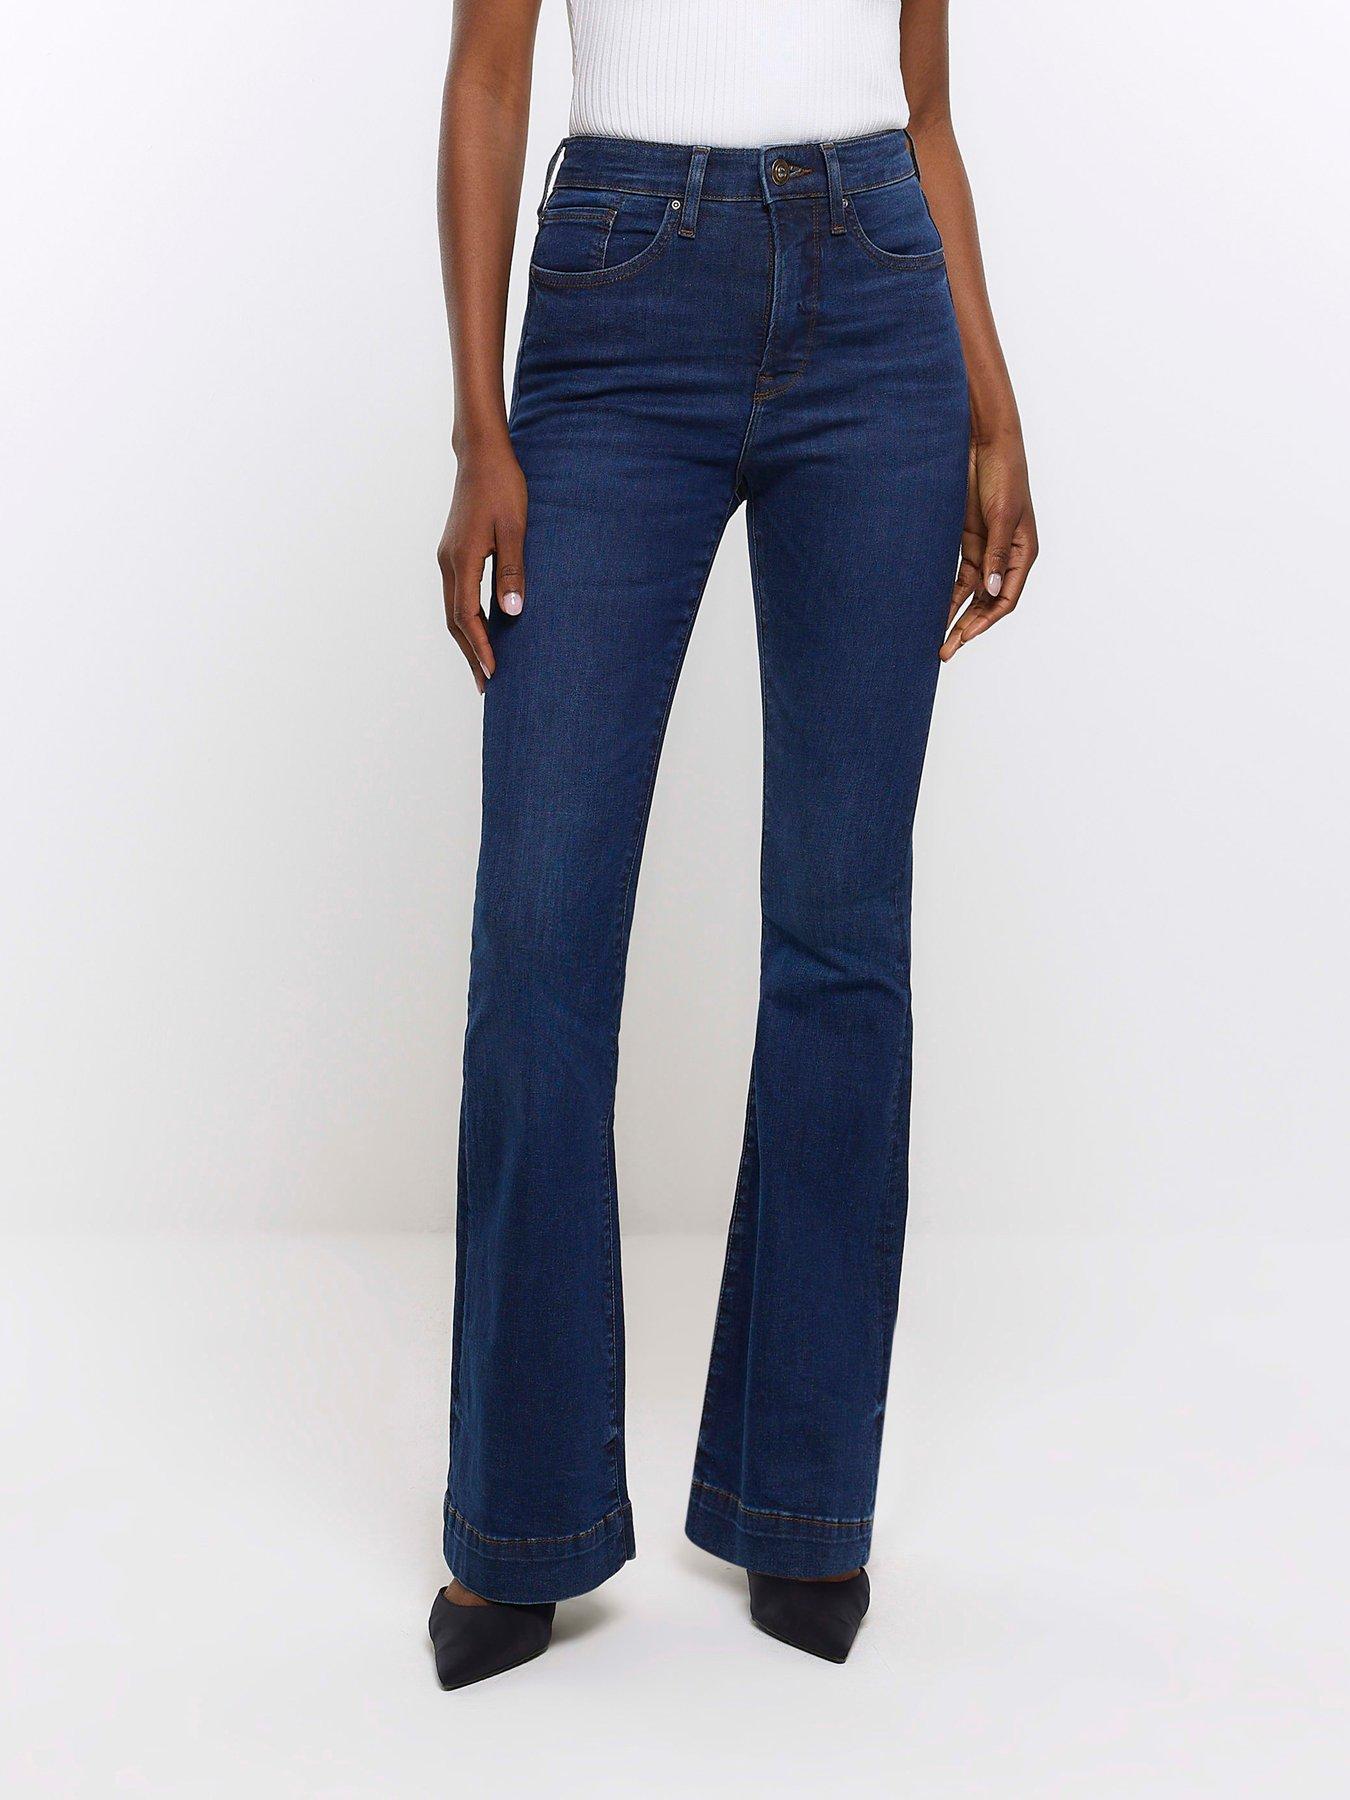 Shop Women's Flared Jeans, Ladies Flares